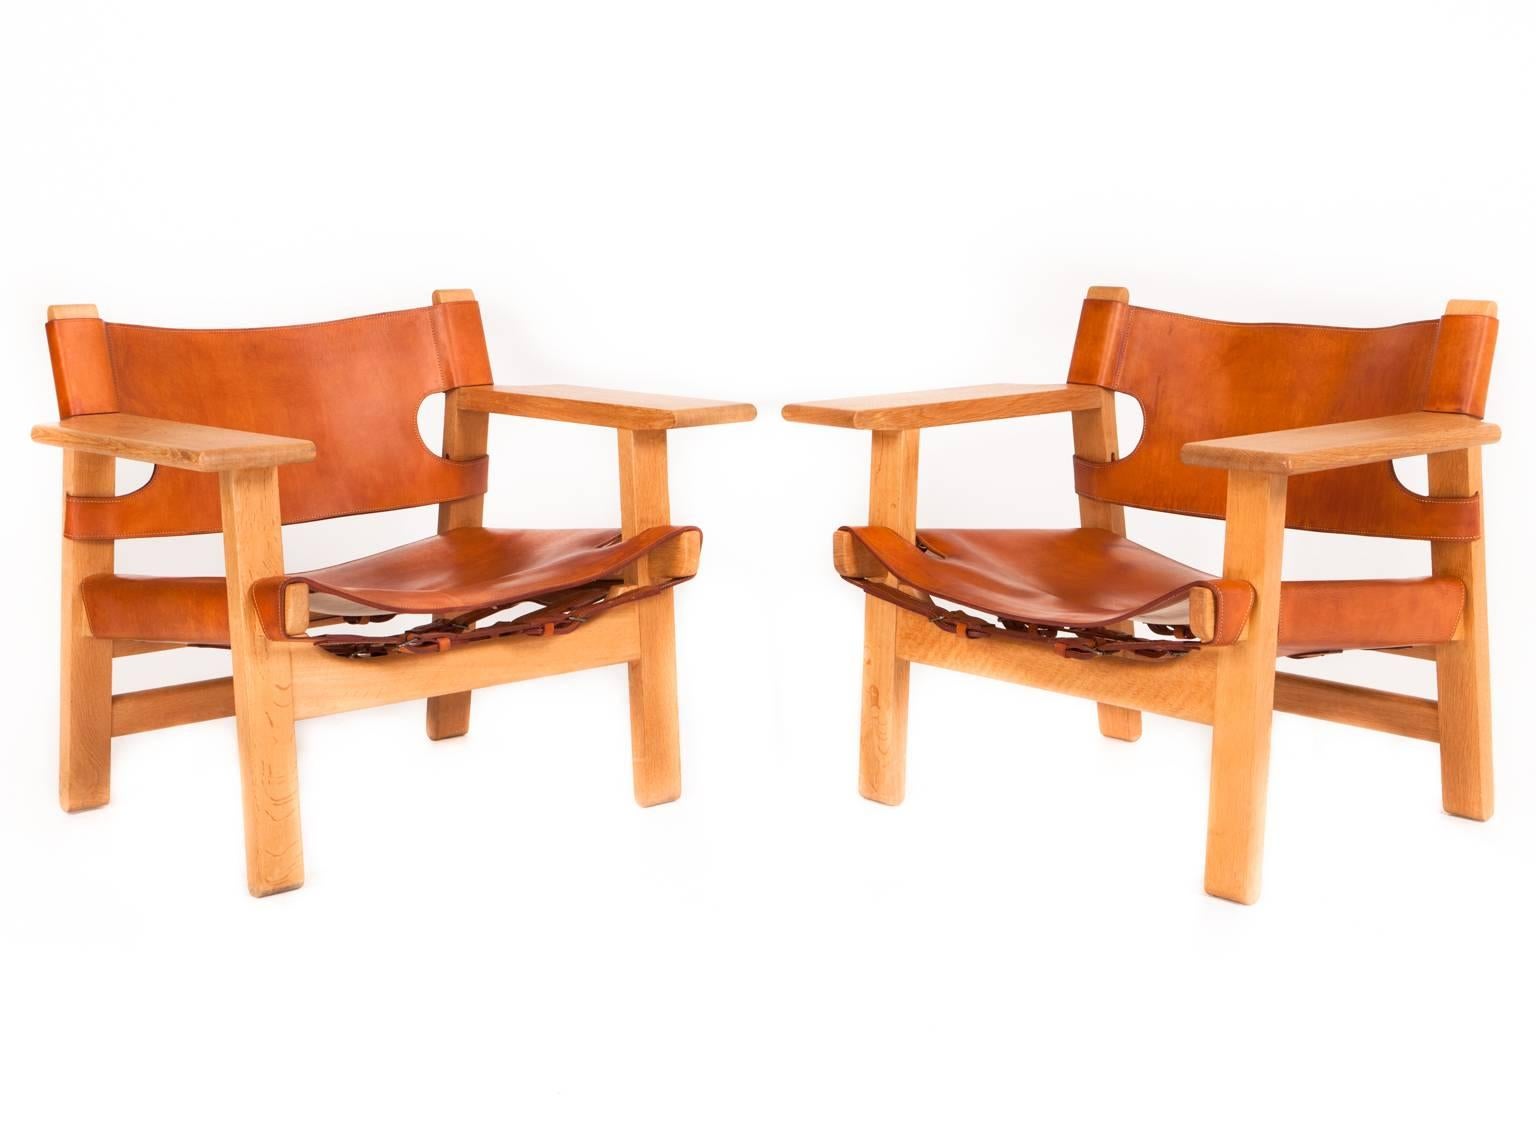 Børge Mogensen.

The Spanish chair.

A pair of solid oak armchairs. Seat and back with patinated natural leather.

Designed 1958.
Manufactured by Fredericia Stolefabrik.